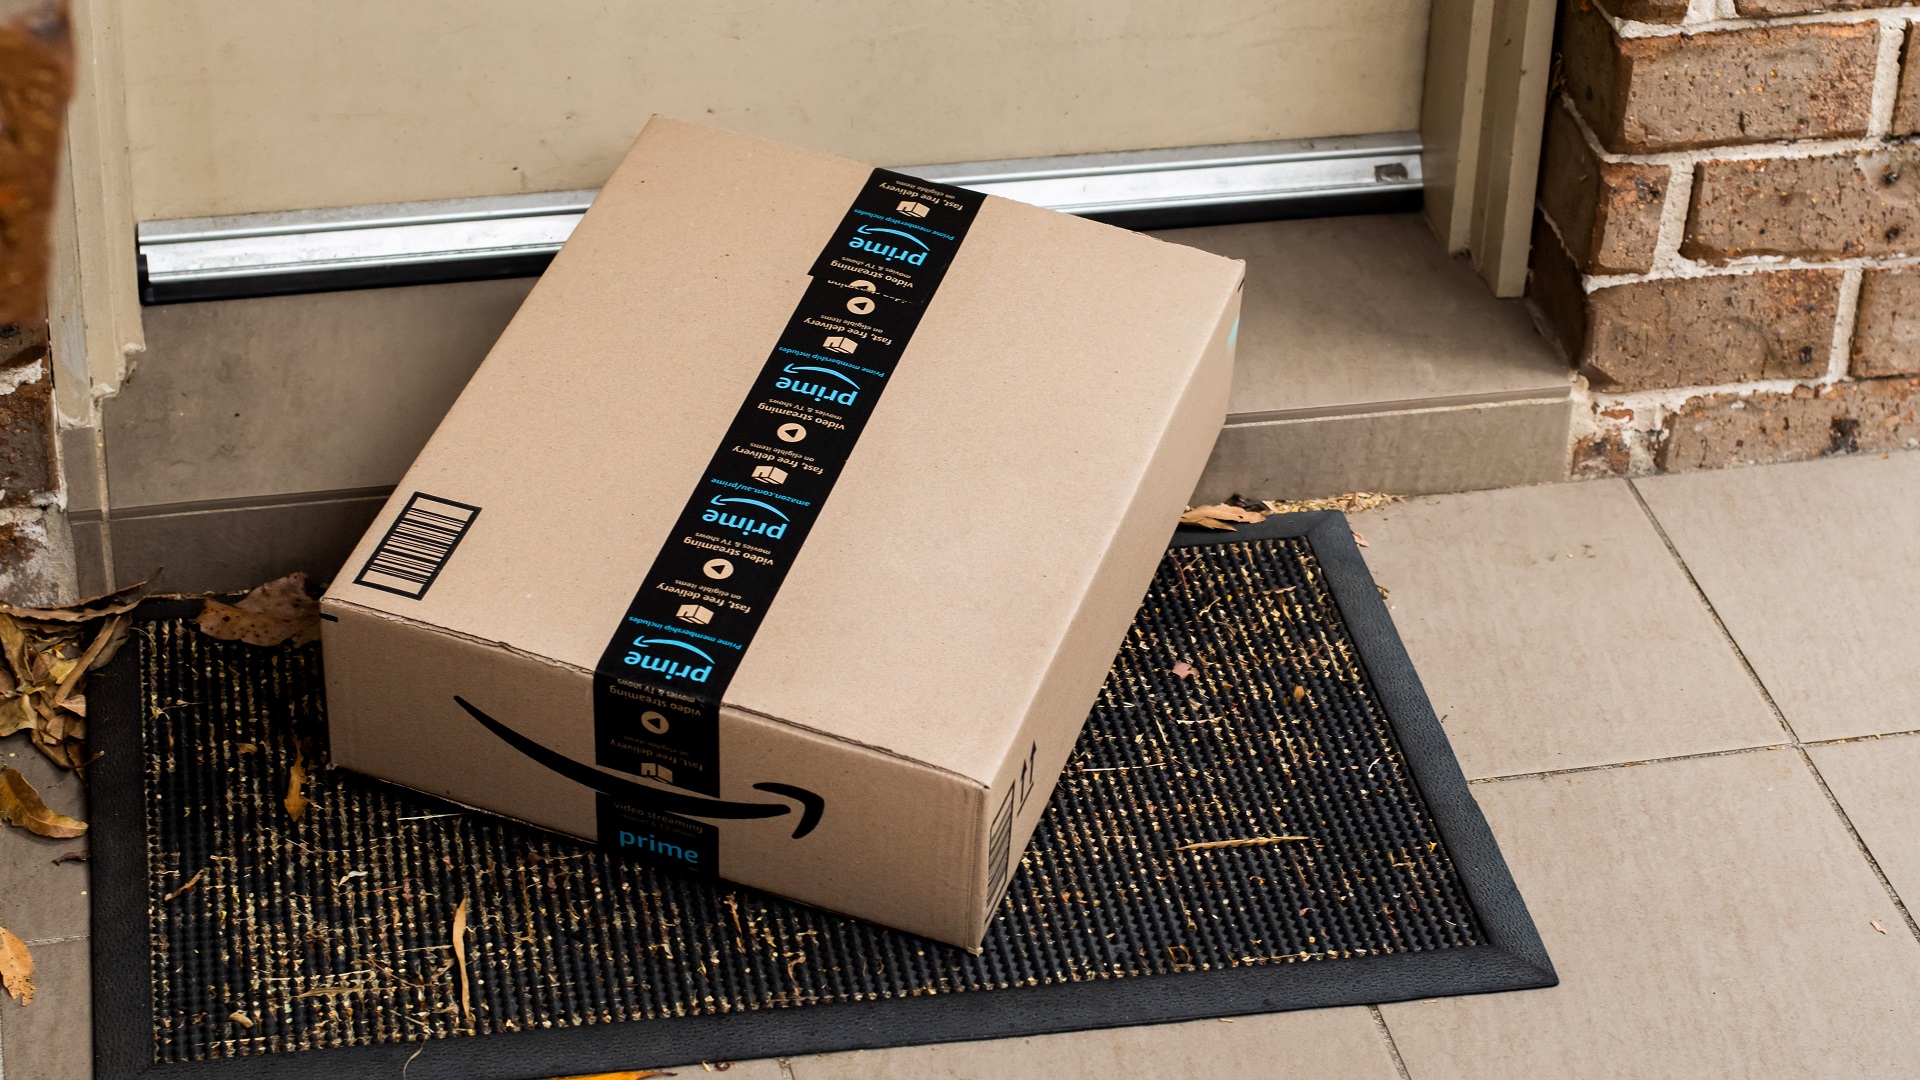 The 15 Most Popular Prime Day Deals Our Readers Have Bought This Year